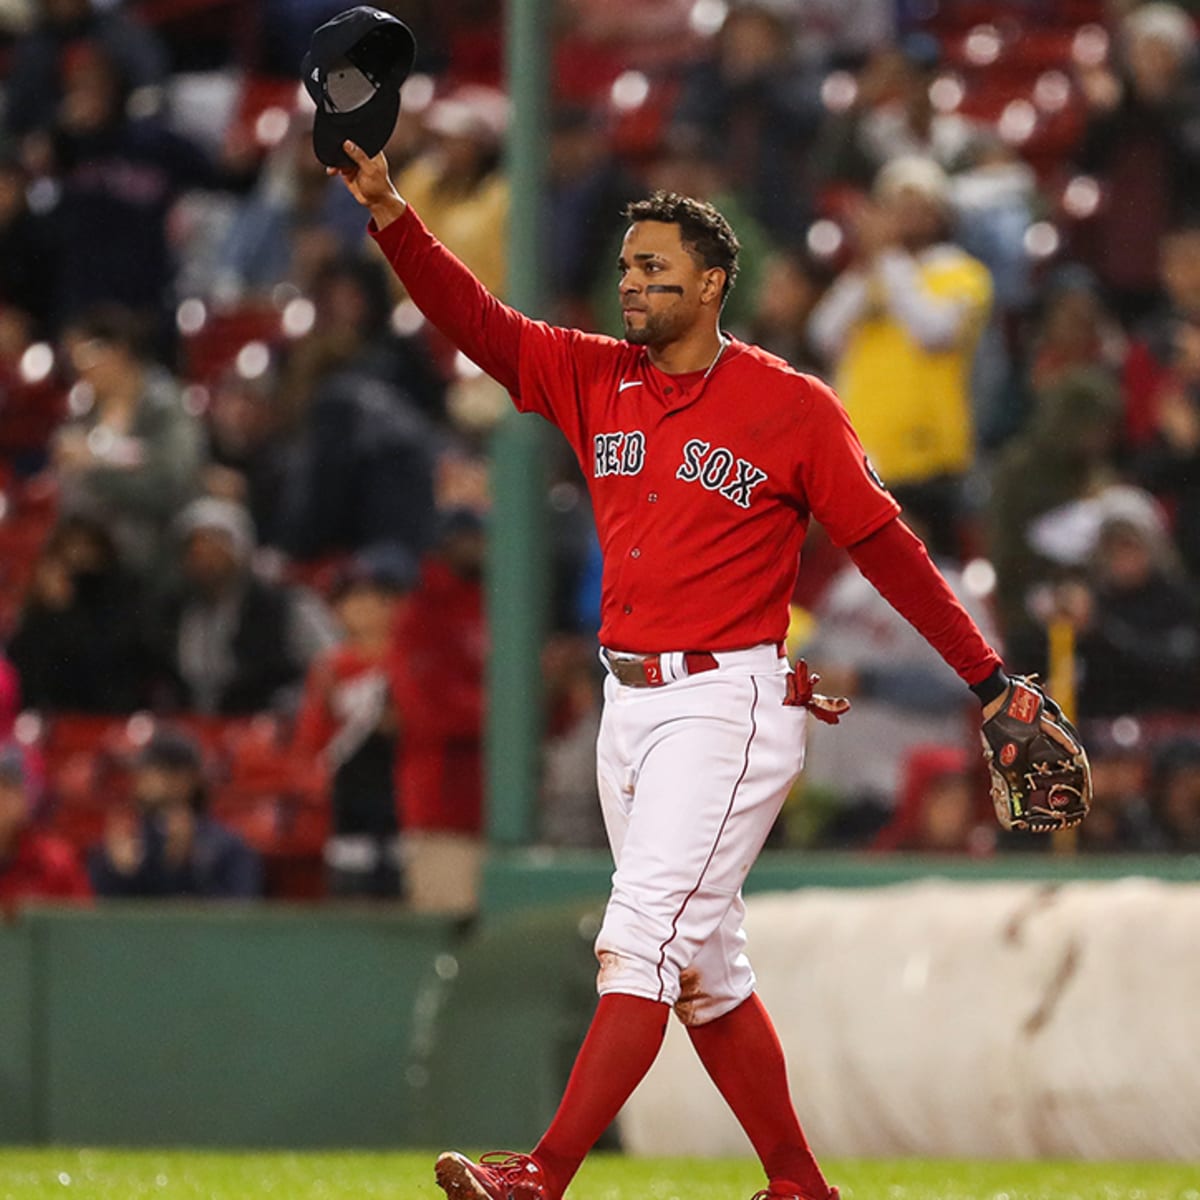 Mastrodonato: Xander Bogaerts signs with Padres as Red Sox let